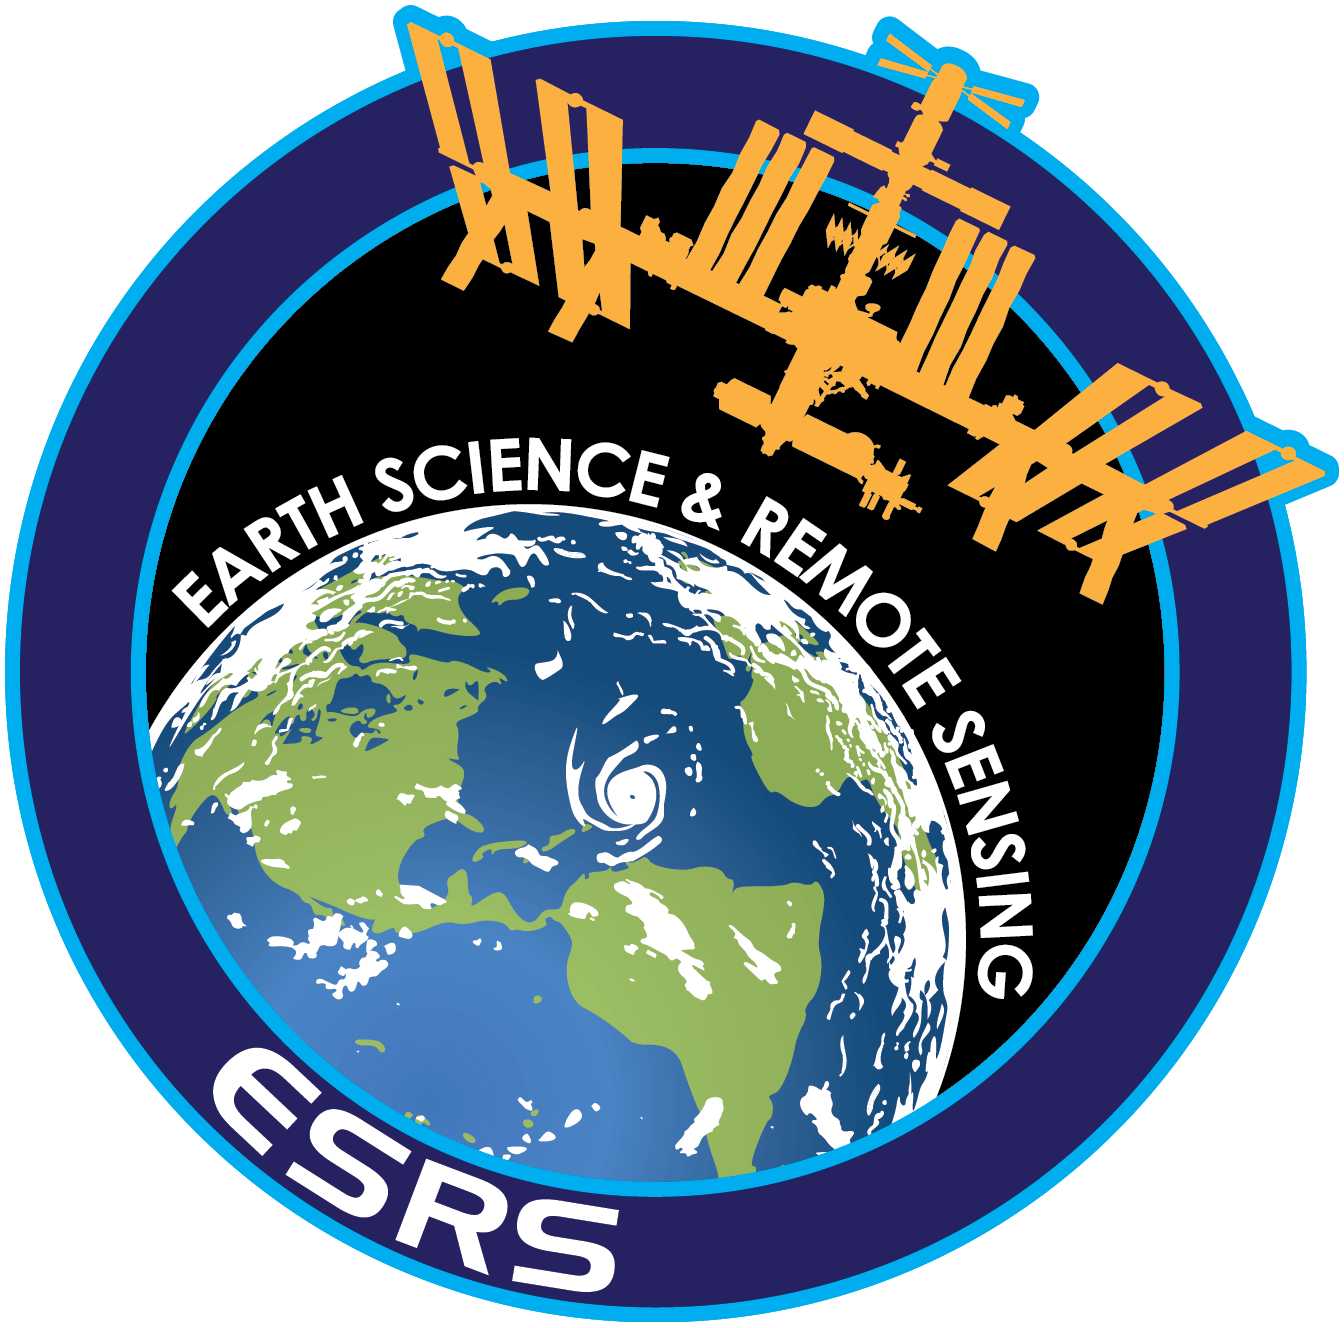 Earth Science Logo - Earth Science and Remote Sensing Unit logo.png